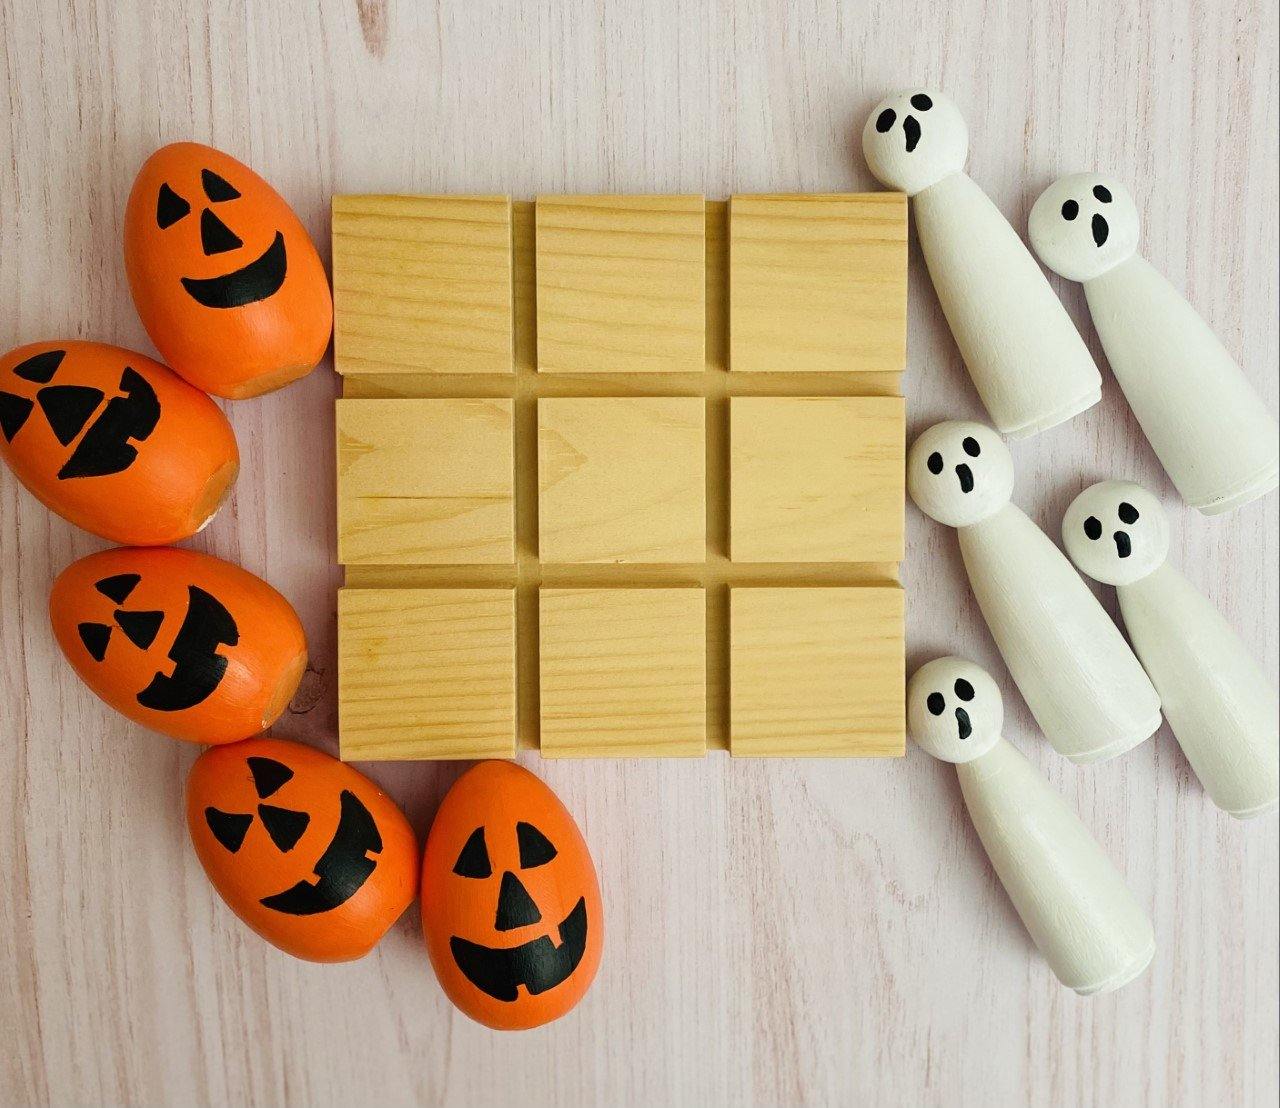 Halloween-themed Tic Tac Toe - 2 Paper Sisters